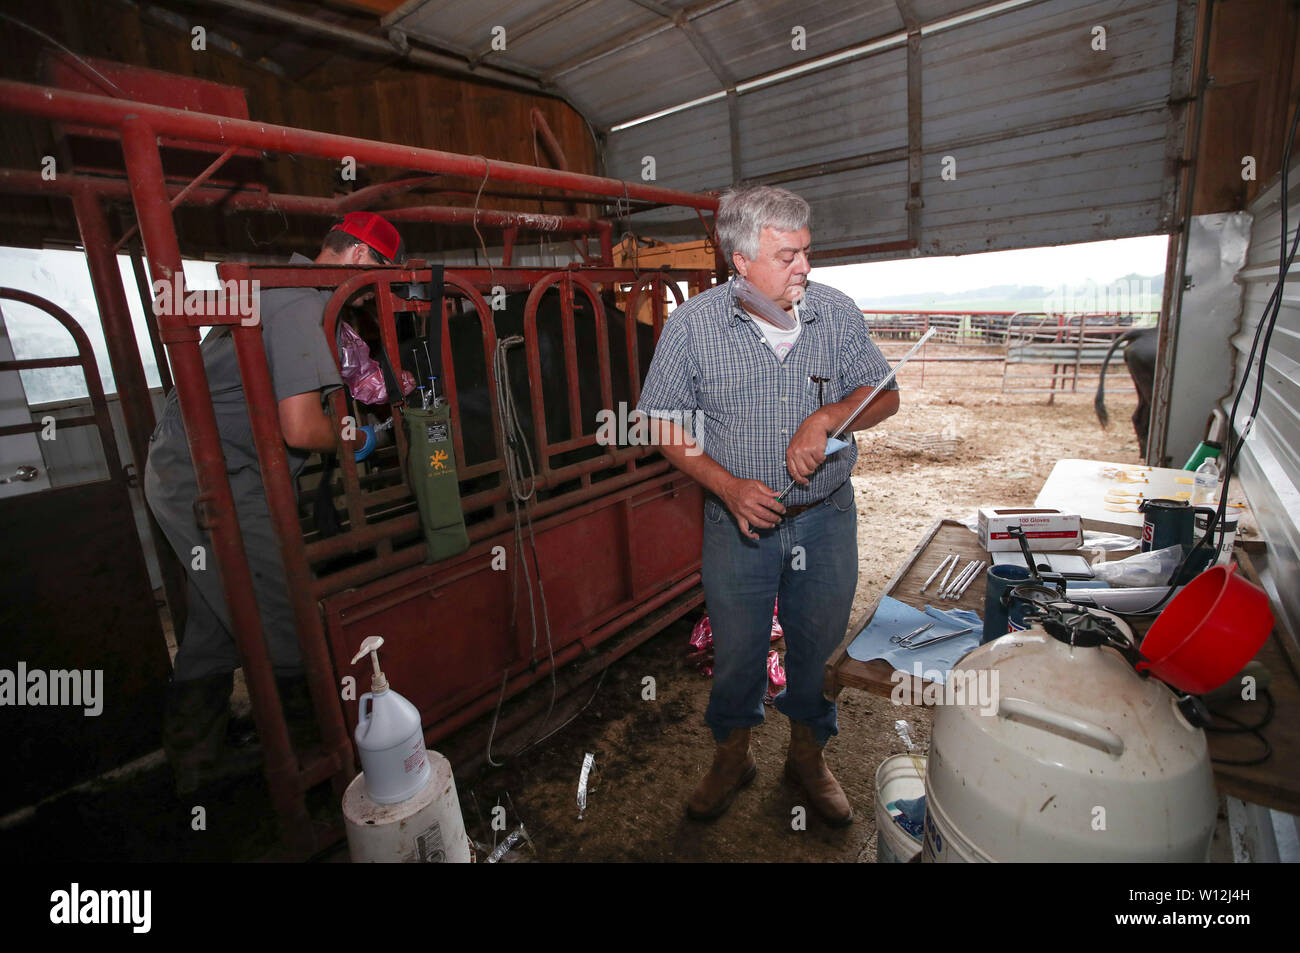 Atlantic, USA. 29th June, 2019. Bill Pellett's long-time business partner Phil Ham (R) prepares a syringe as his son Cody Ham carries out artificial insemination procedures for a cow on Bill Pellett's farm in Atlantic, Iowa, the United States, on June 20, 2019. Bill Pellett, a fifth-generation farmer in Atlantic, a small city in the U.S. Midwestern state of Iowa, has found a cost-effective way to raise better calves each year without purchasing new bulls -- artificial insemination (AI). Credit: Wang Ying/Xinhua/Alamy Live News Stock Photo